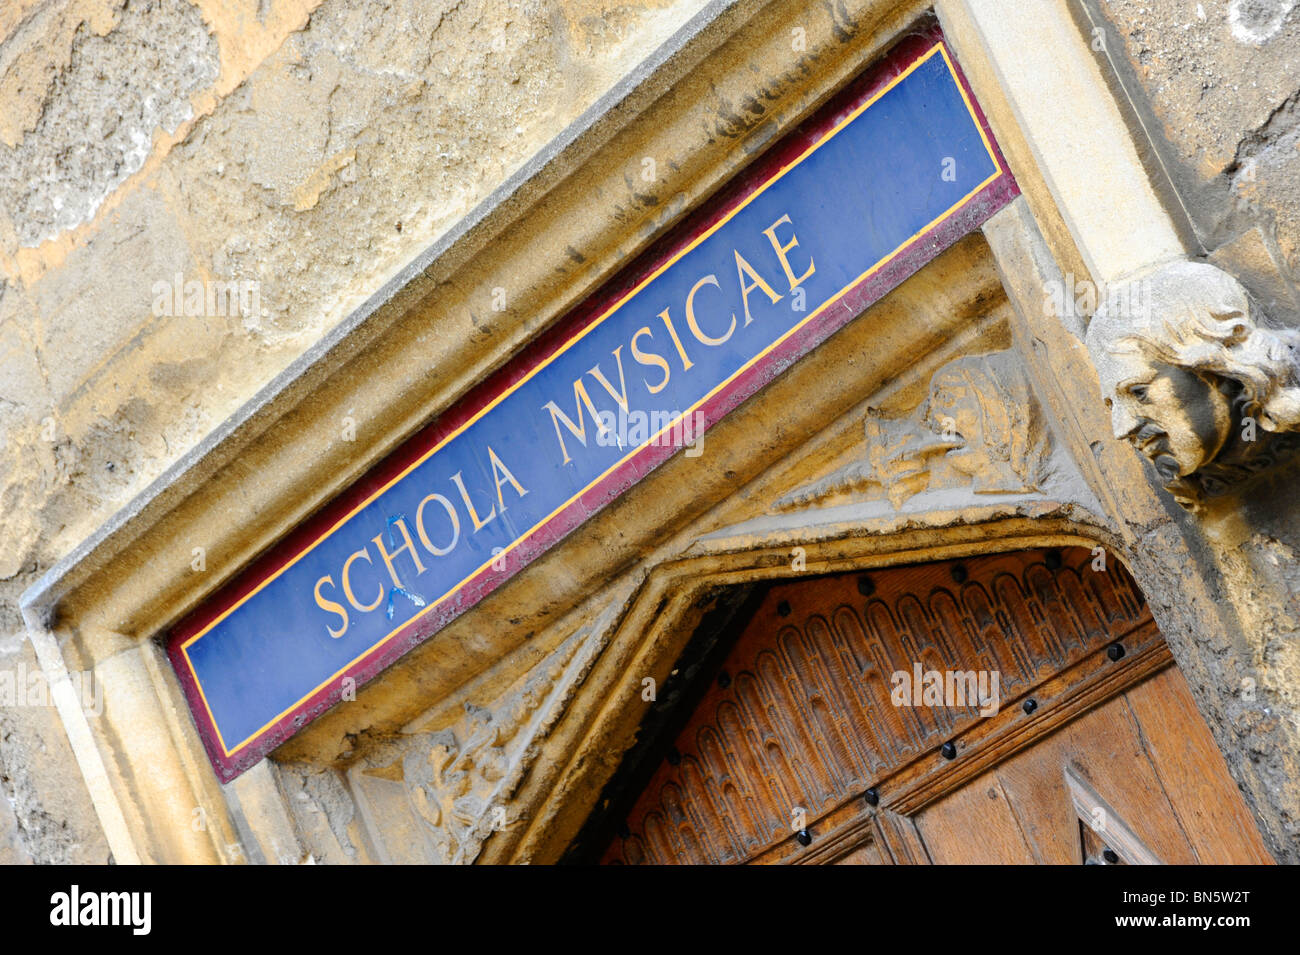 Schola Musicae building sign in Oxford University Stock Photo